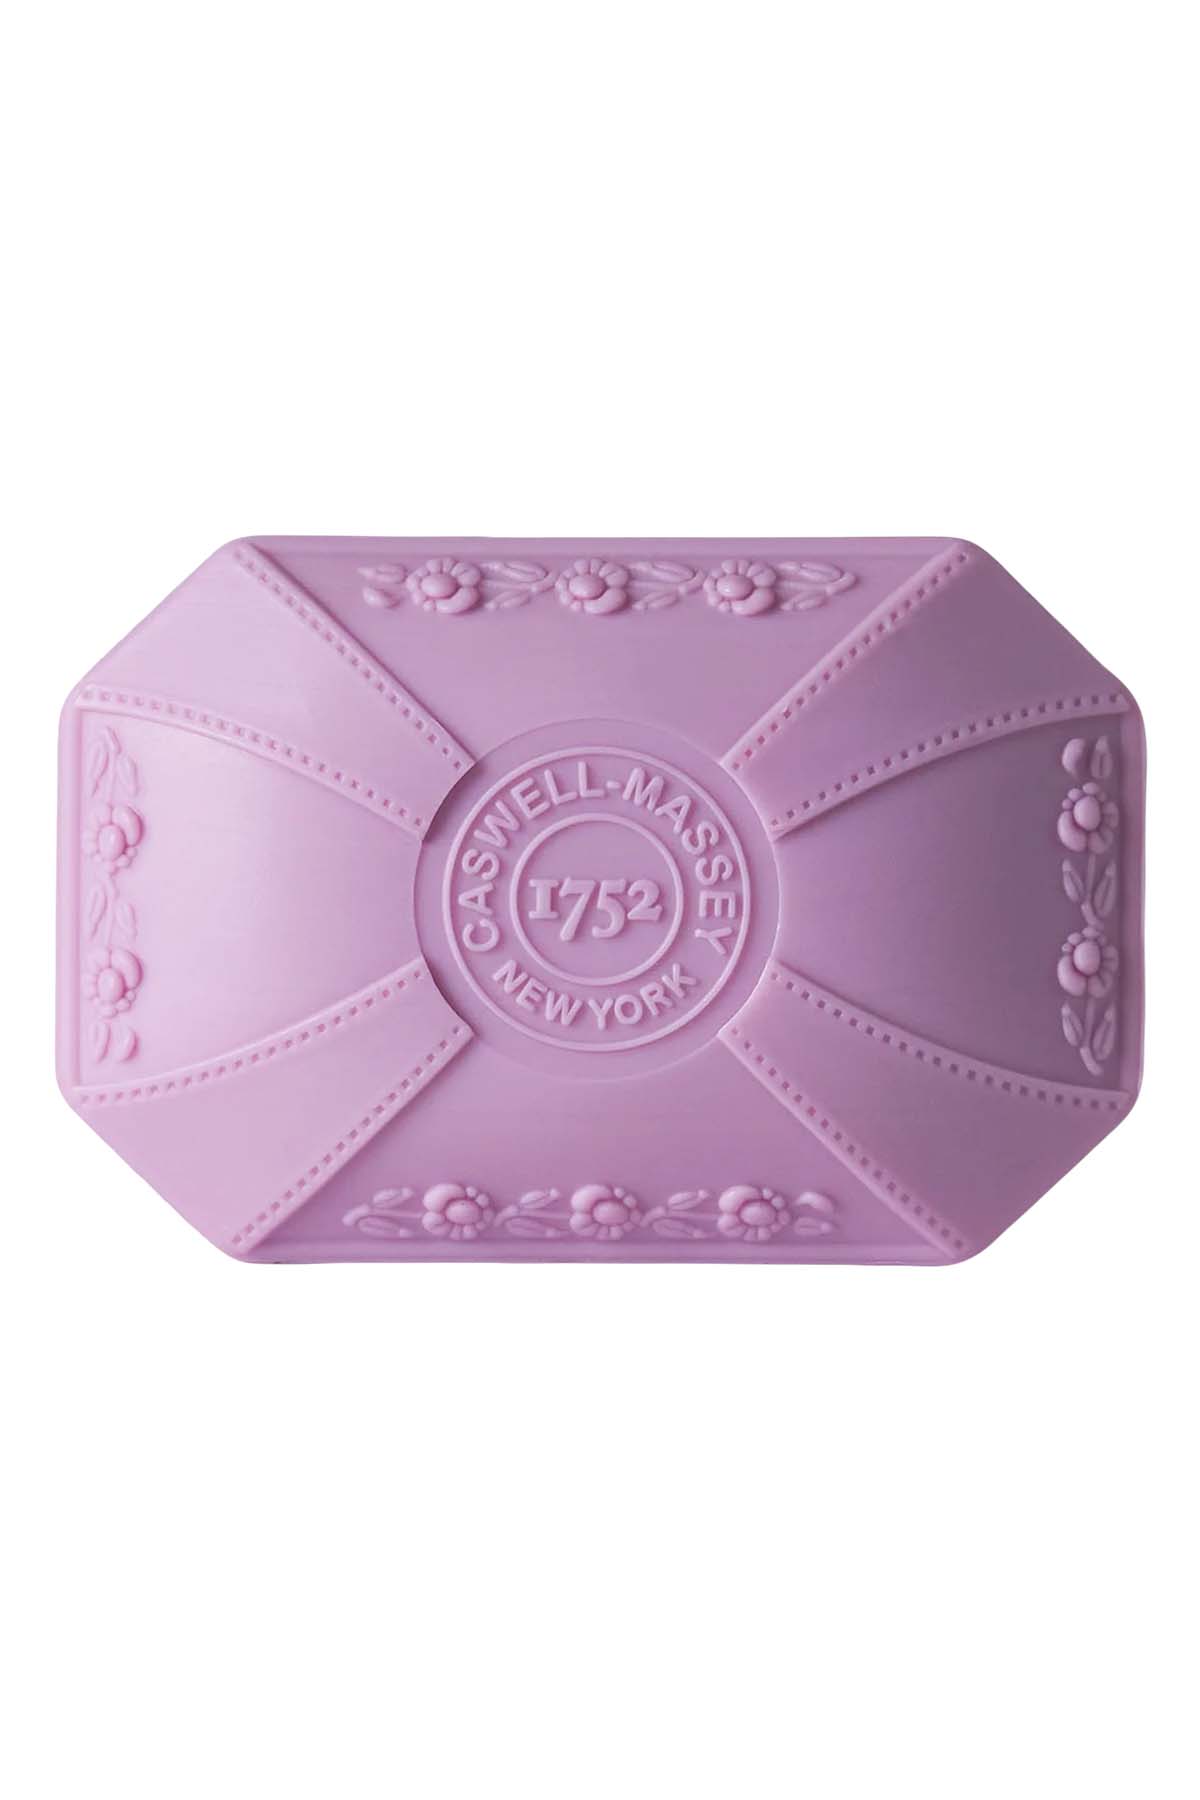 Caswell Massey Lilac Bar Soap